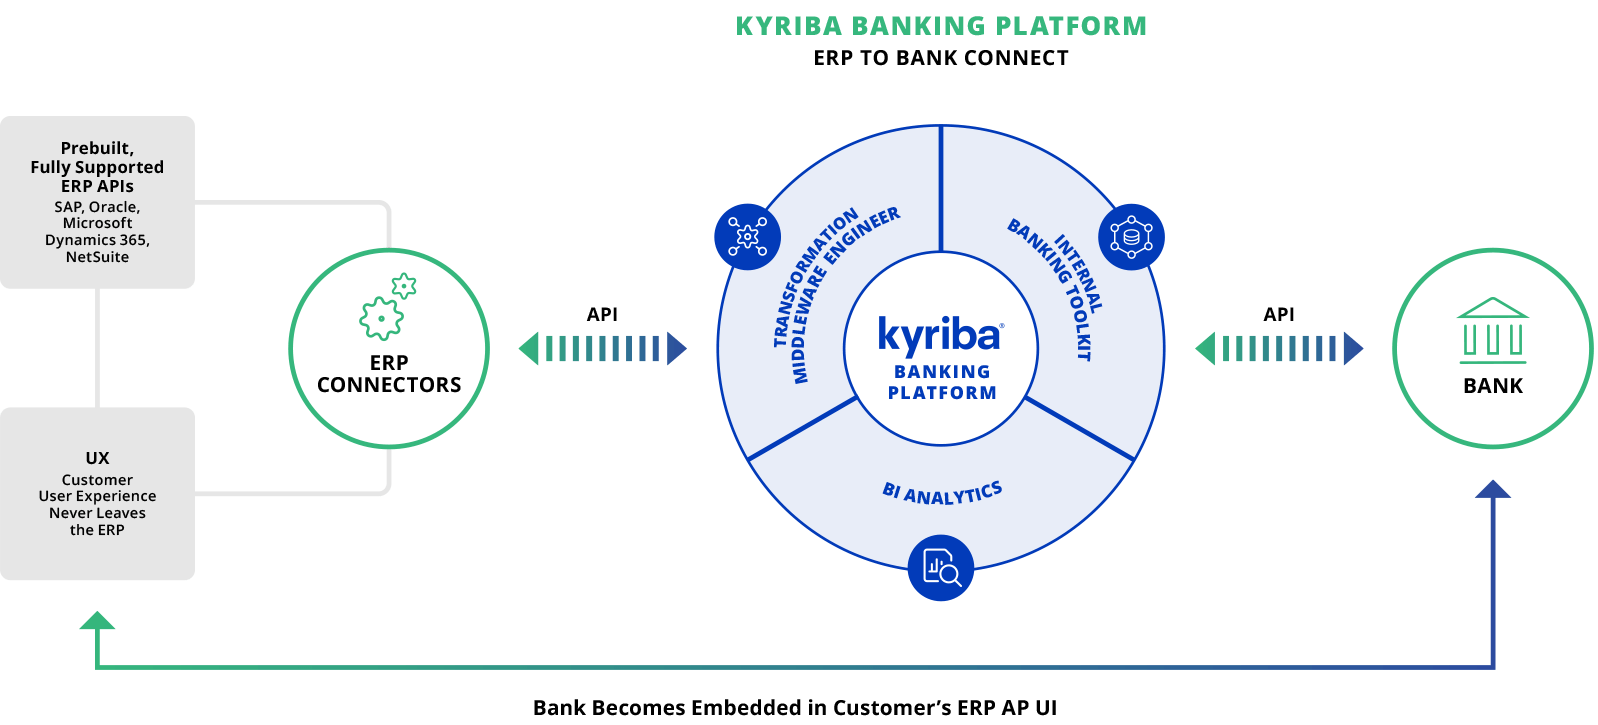 Connectivity-as-a-Service by Kyriba to support open banking for corporates